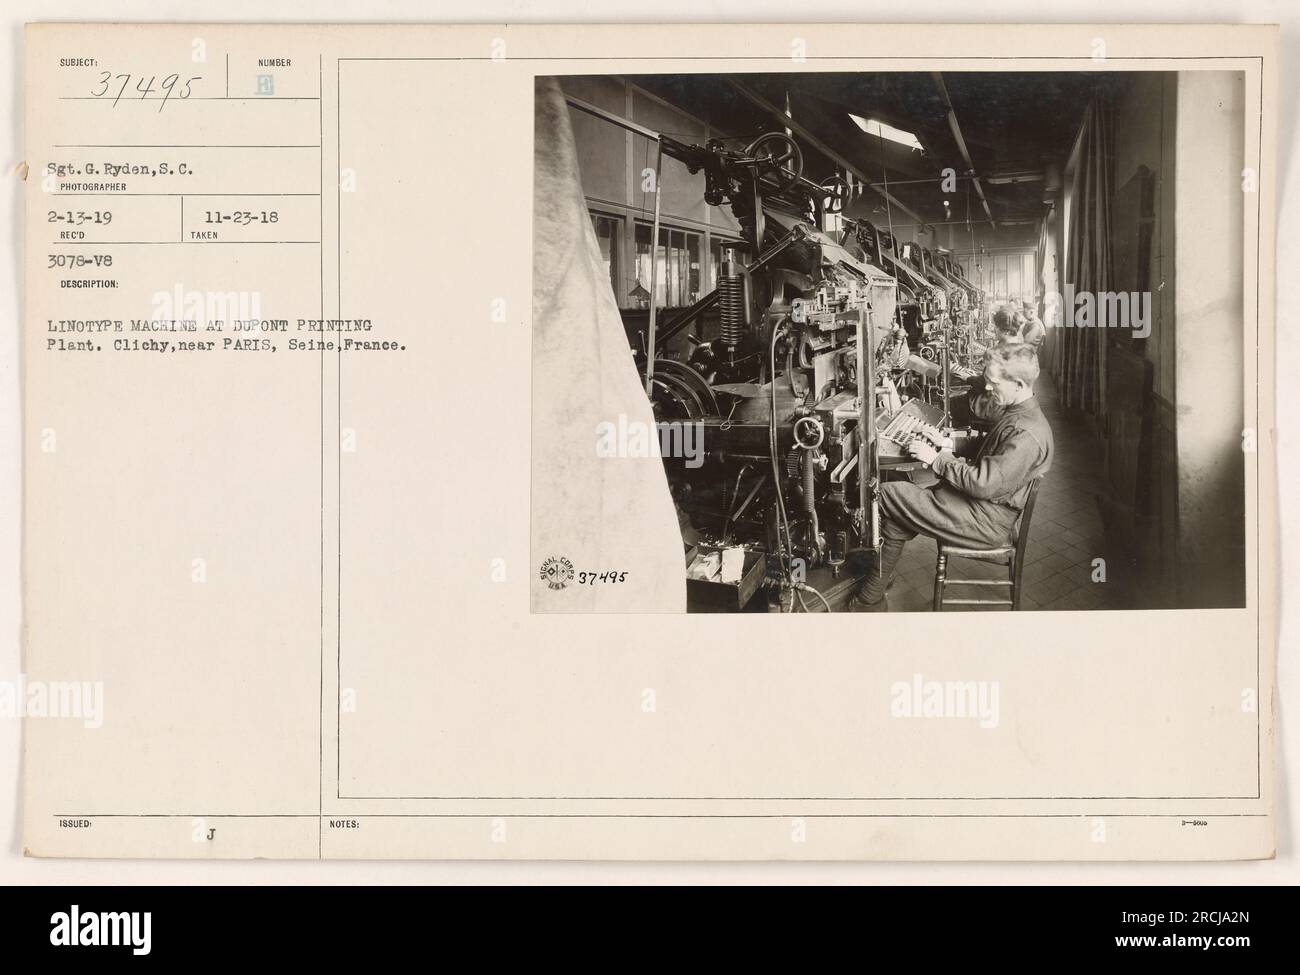 Sgt. G. Ryden photographed a Linotype machine at the DuPont Printing Plant in Clichy, near Paris, France. The photo was issued on November 23, 1918, and received on February 13, 1919. Notes state the photo's ID as 37495. Stock Photo